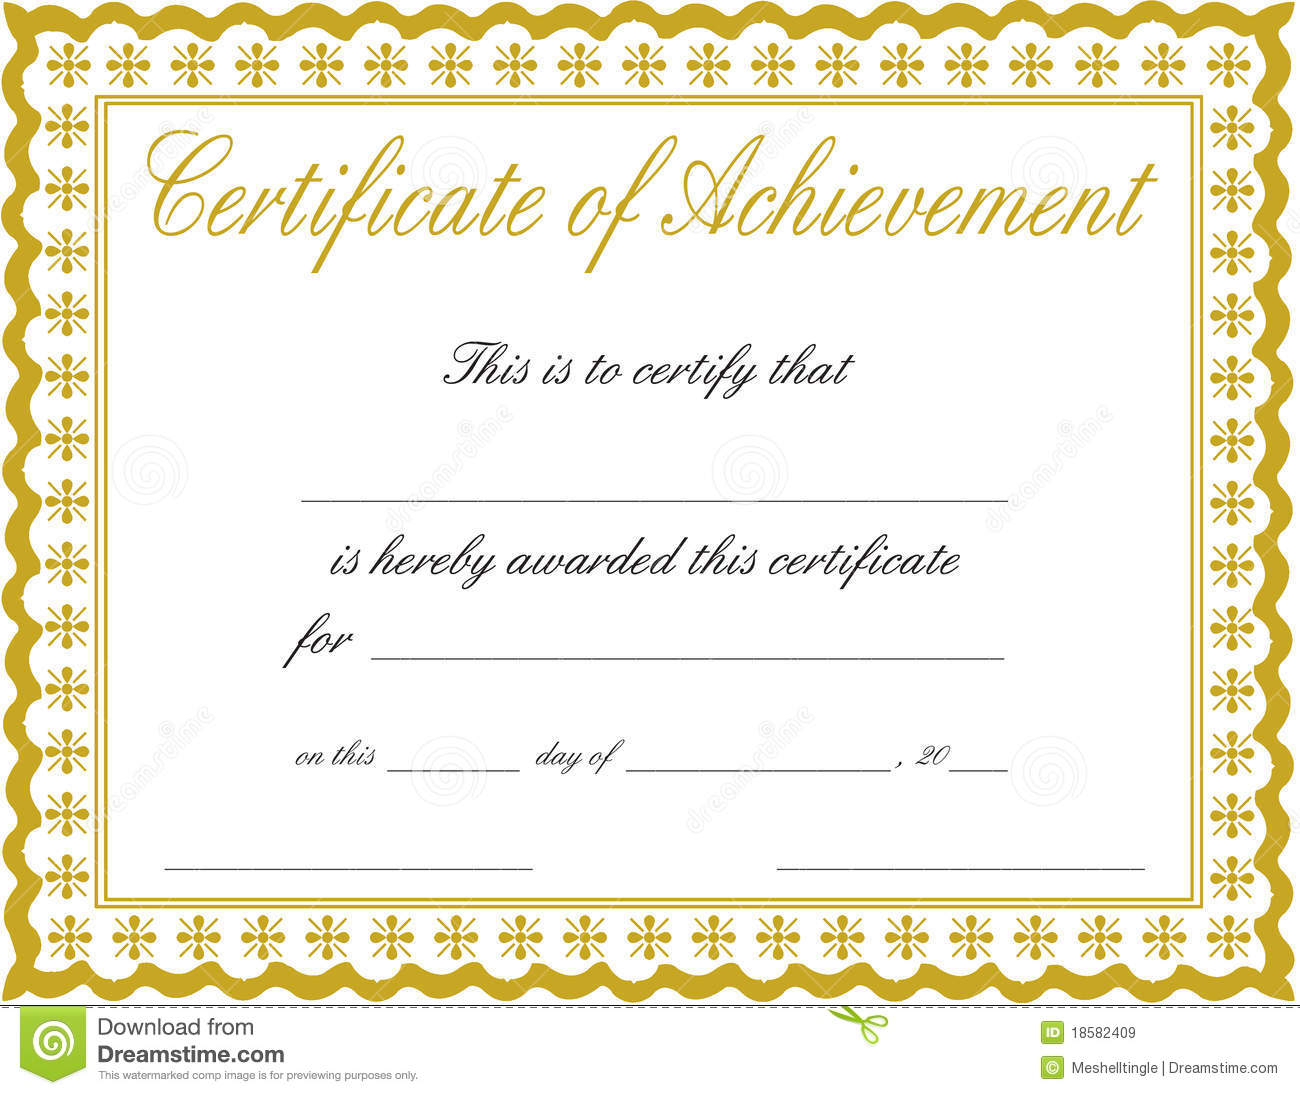 Free Printable Certificate Of Achievement Template | Mult With Certificate Of Achievement Template For Kids